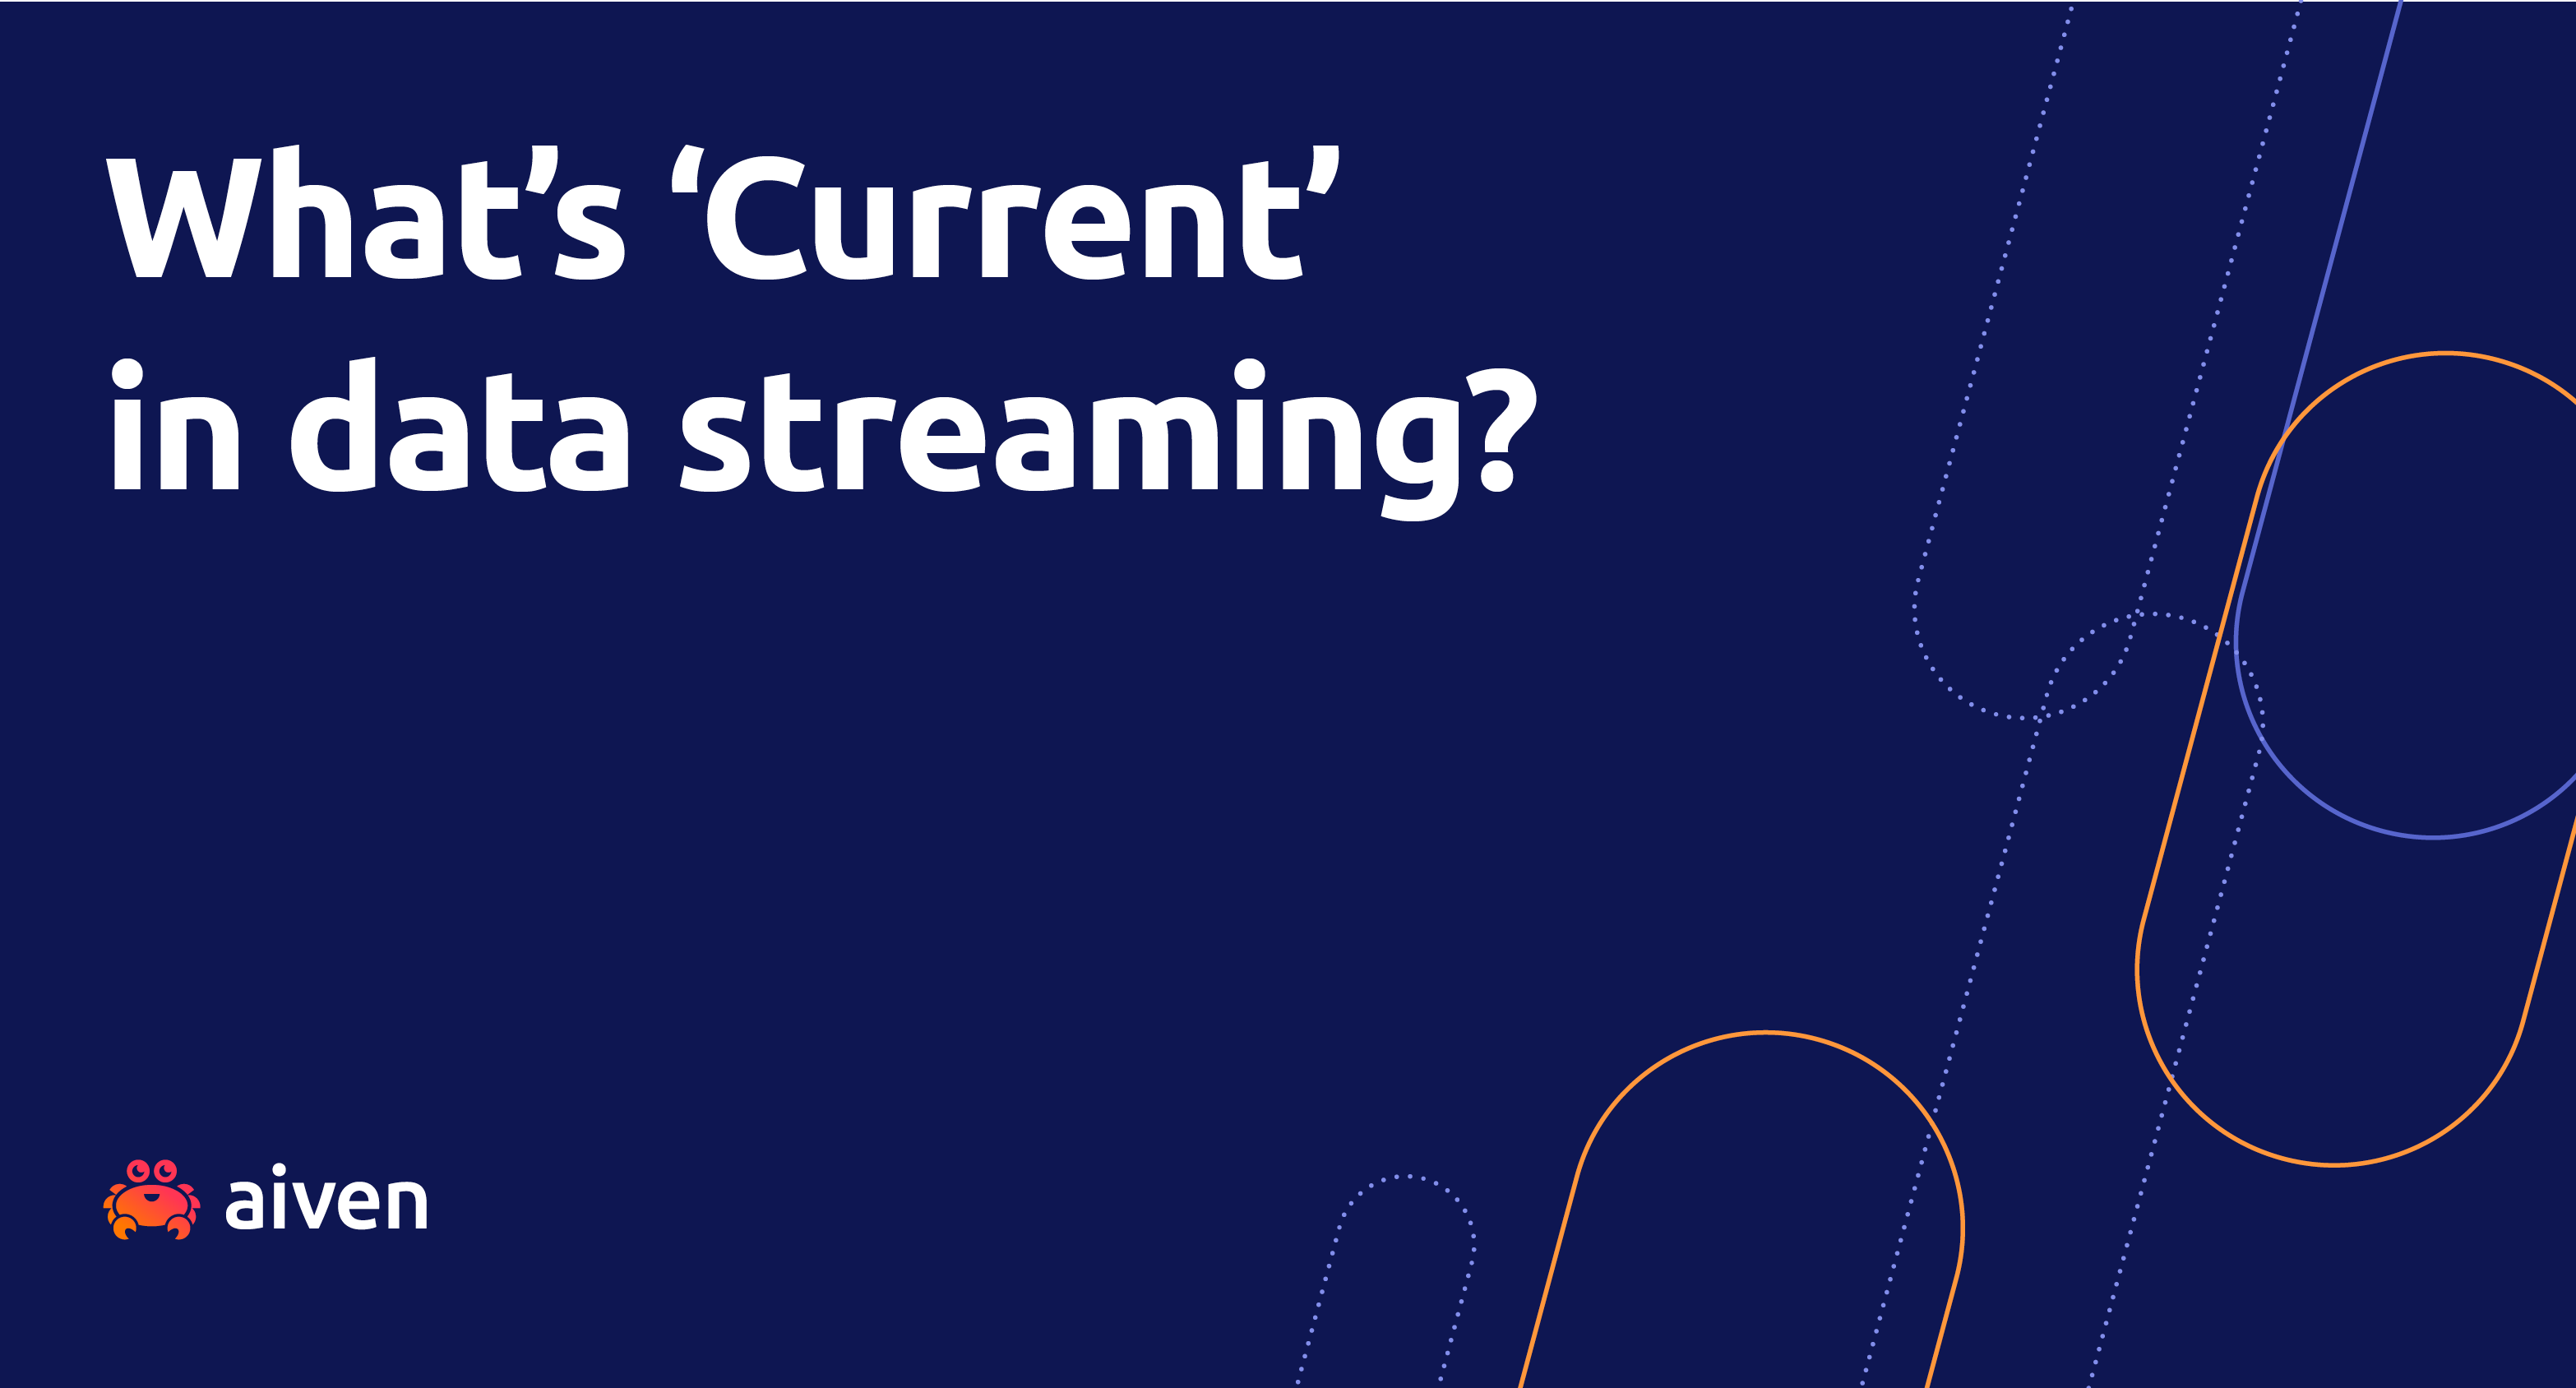 What's "Current" in data streaming?